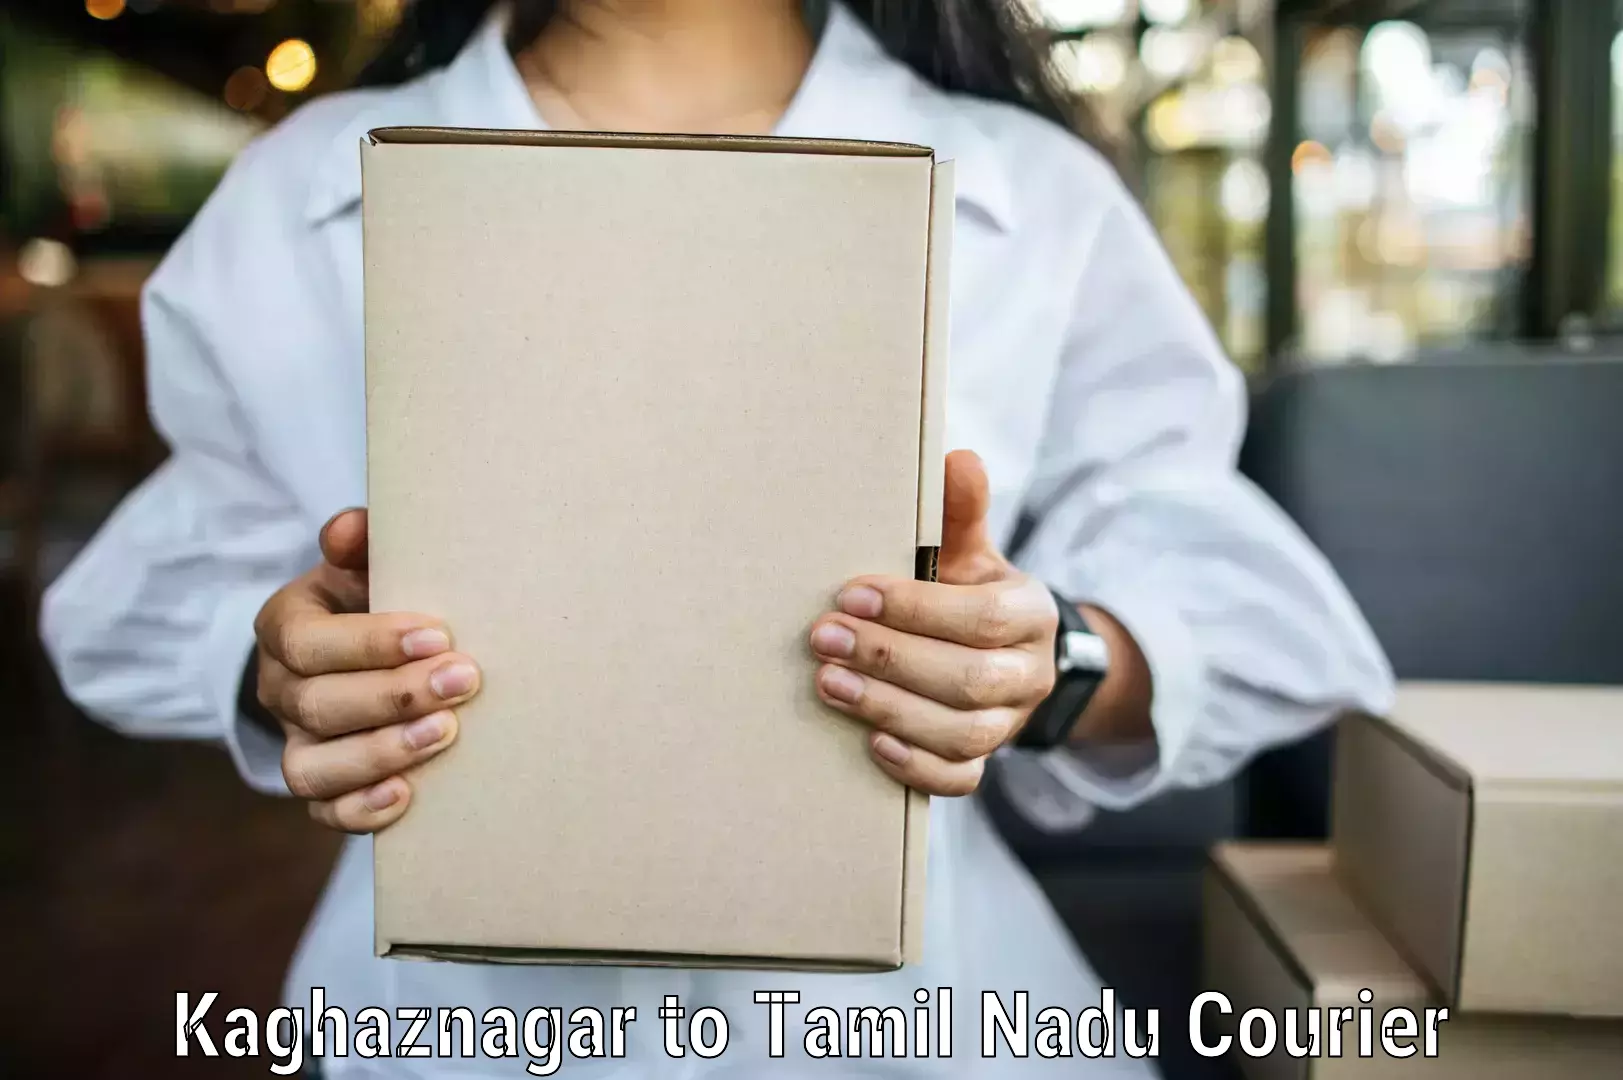 Next-day delivery options Kaghaznagar to Muthukulathur